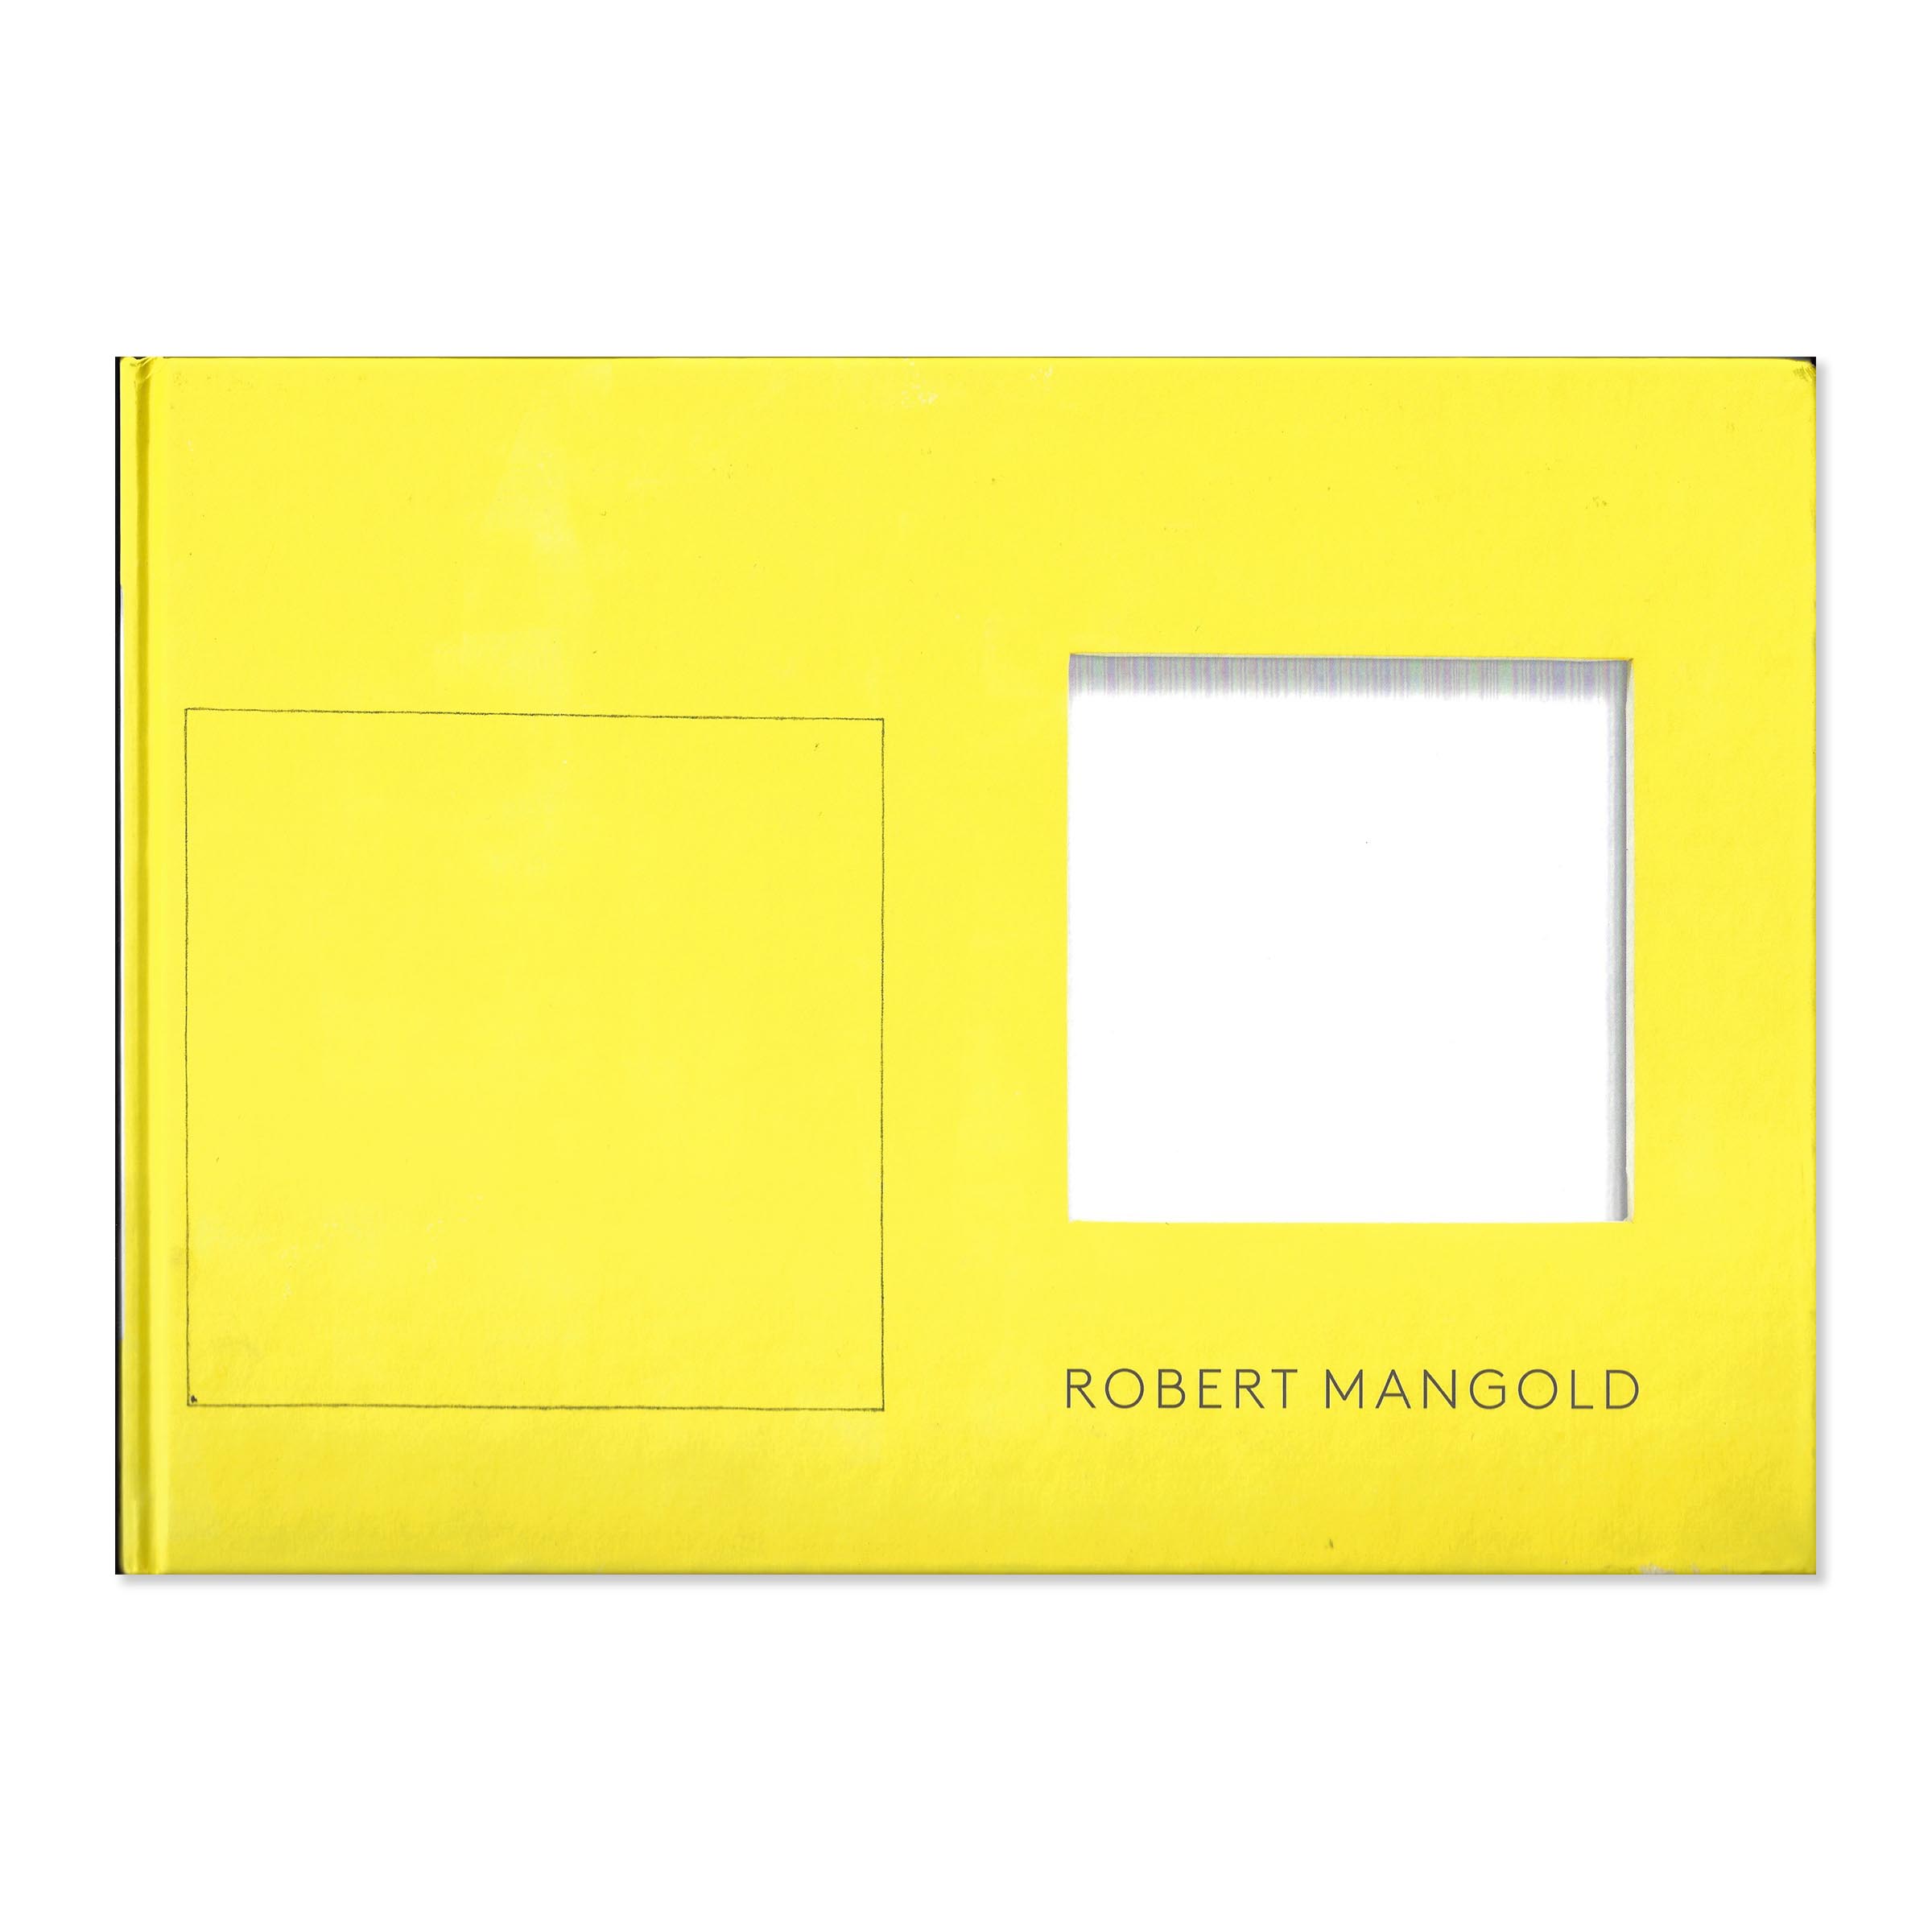 Robert Mangold Pace gallery catalogue cover